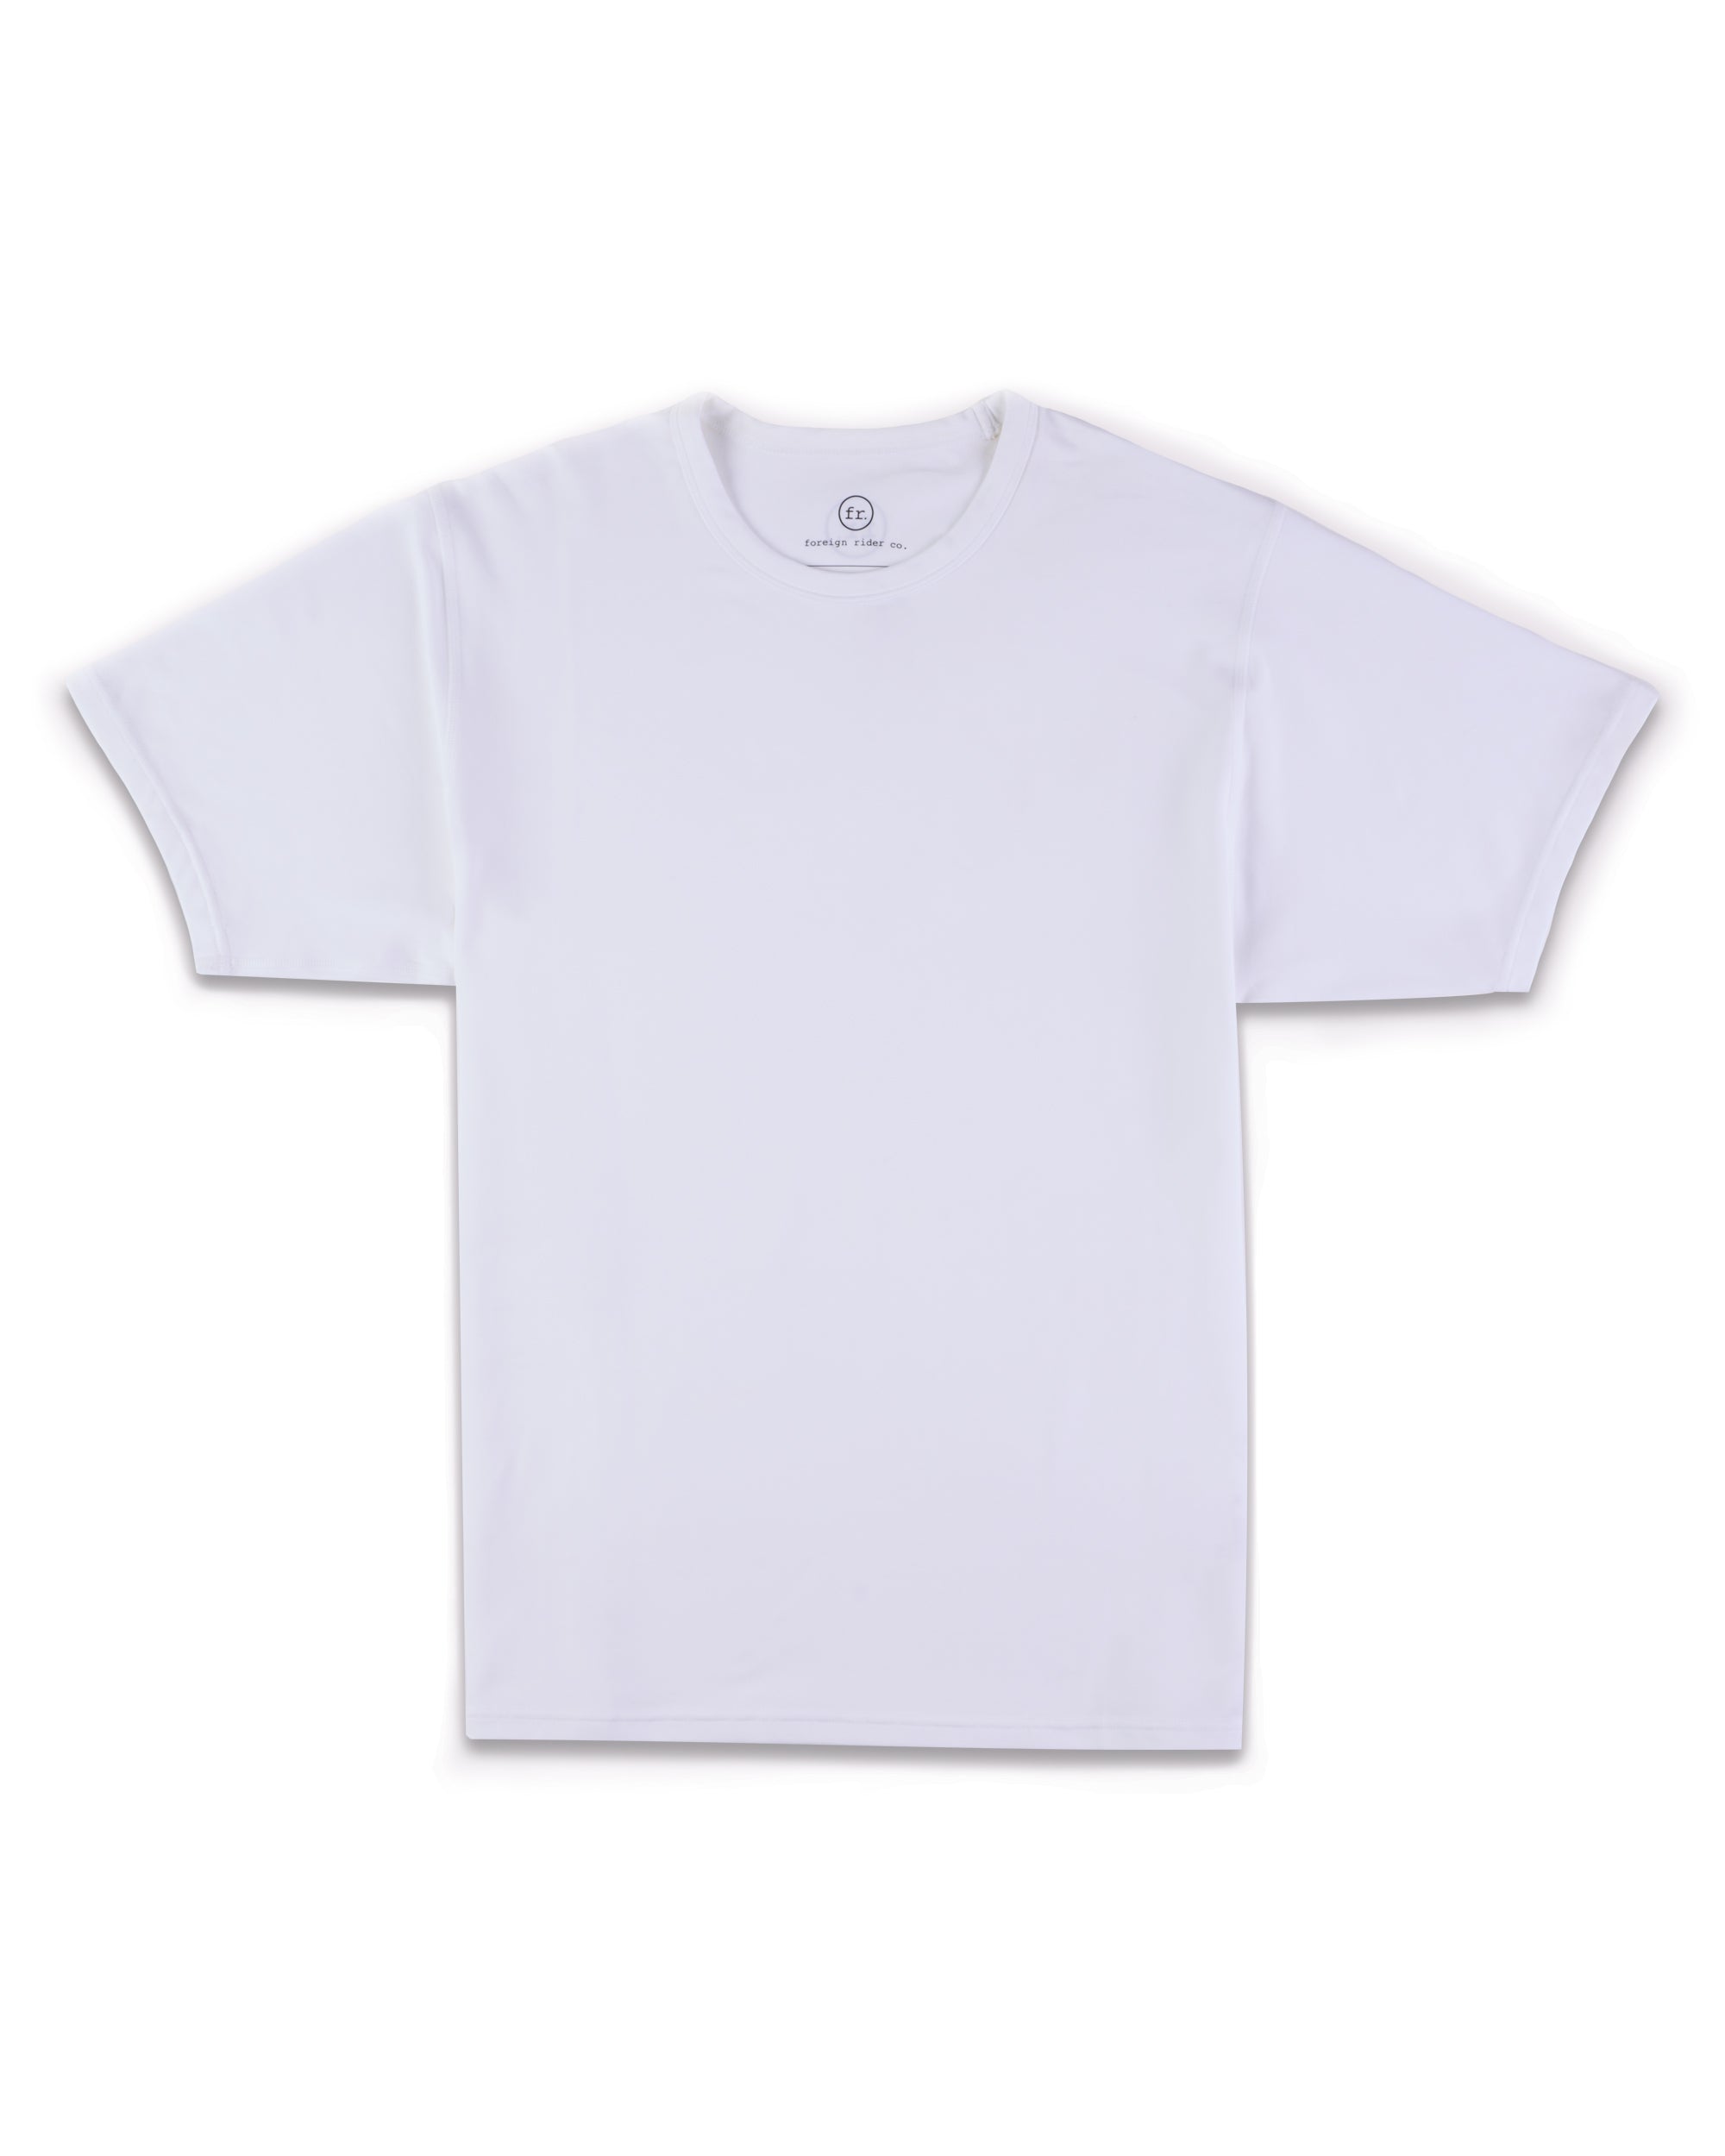 Performance SS T-Shirt White - Foreign Rider Co.